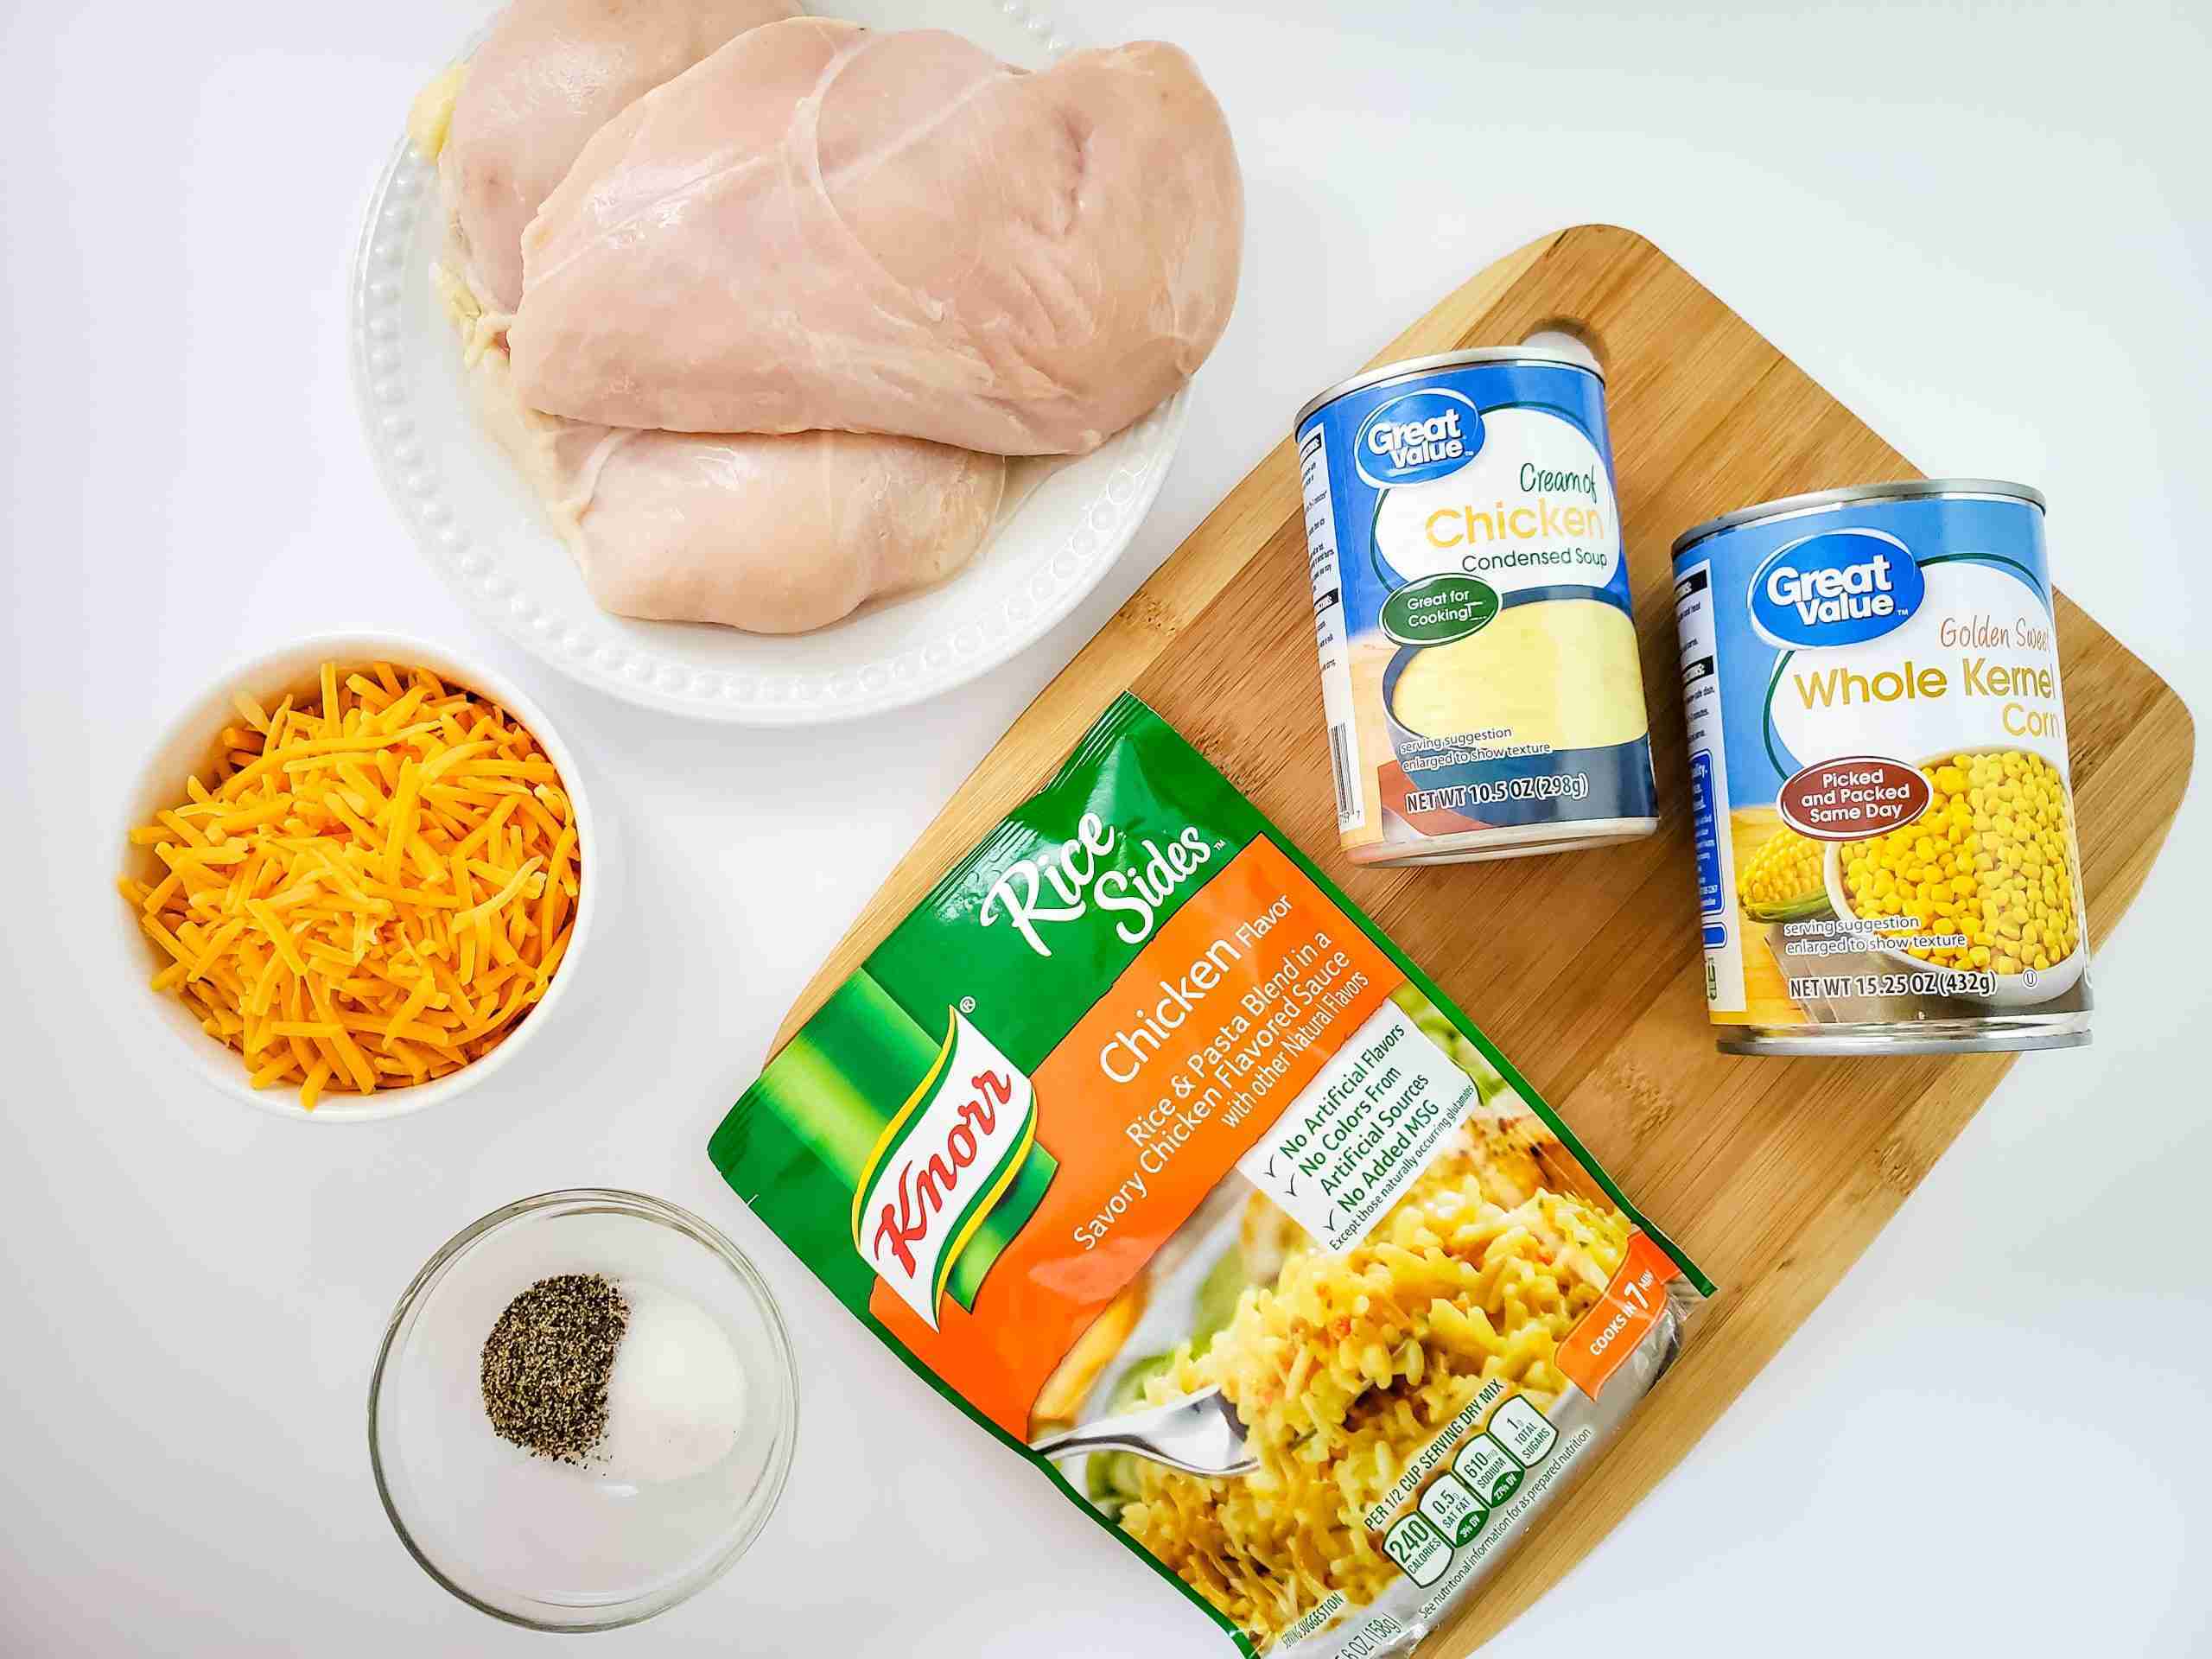 knorr chicken flavored rice, chicken breast, shredded cheddar cheese, great value cream of chicken soup, great value whole kernel corn, wooden cutting board